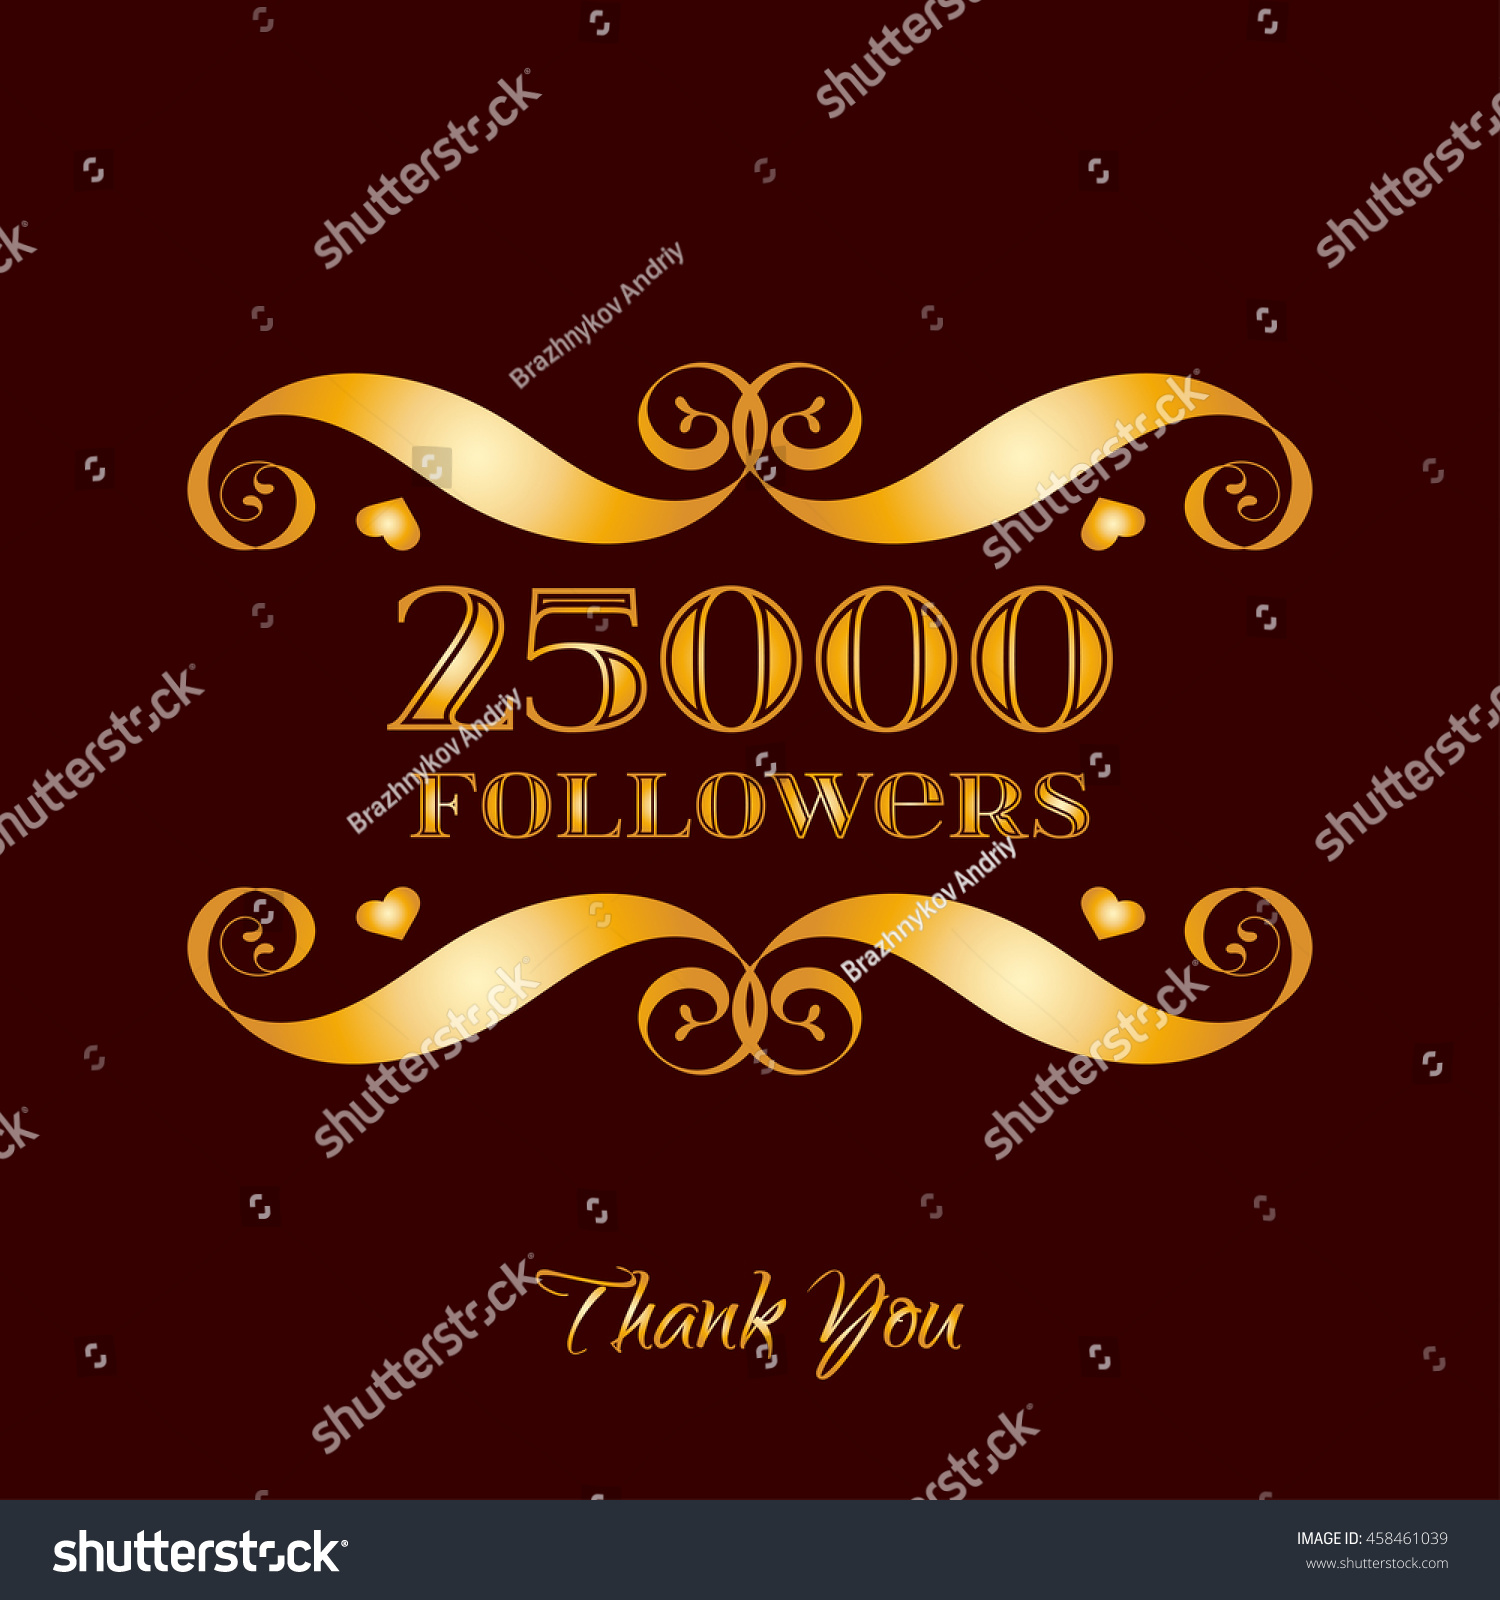 SVG of Vector gold 25000 followers badge over brown. Easy use and recolor elements for your design. svg